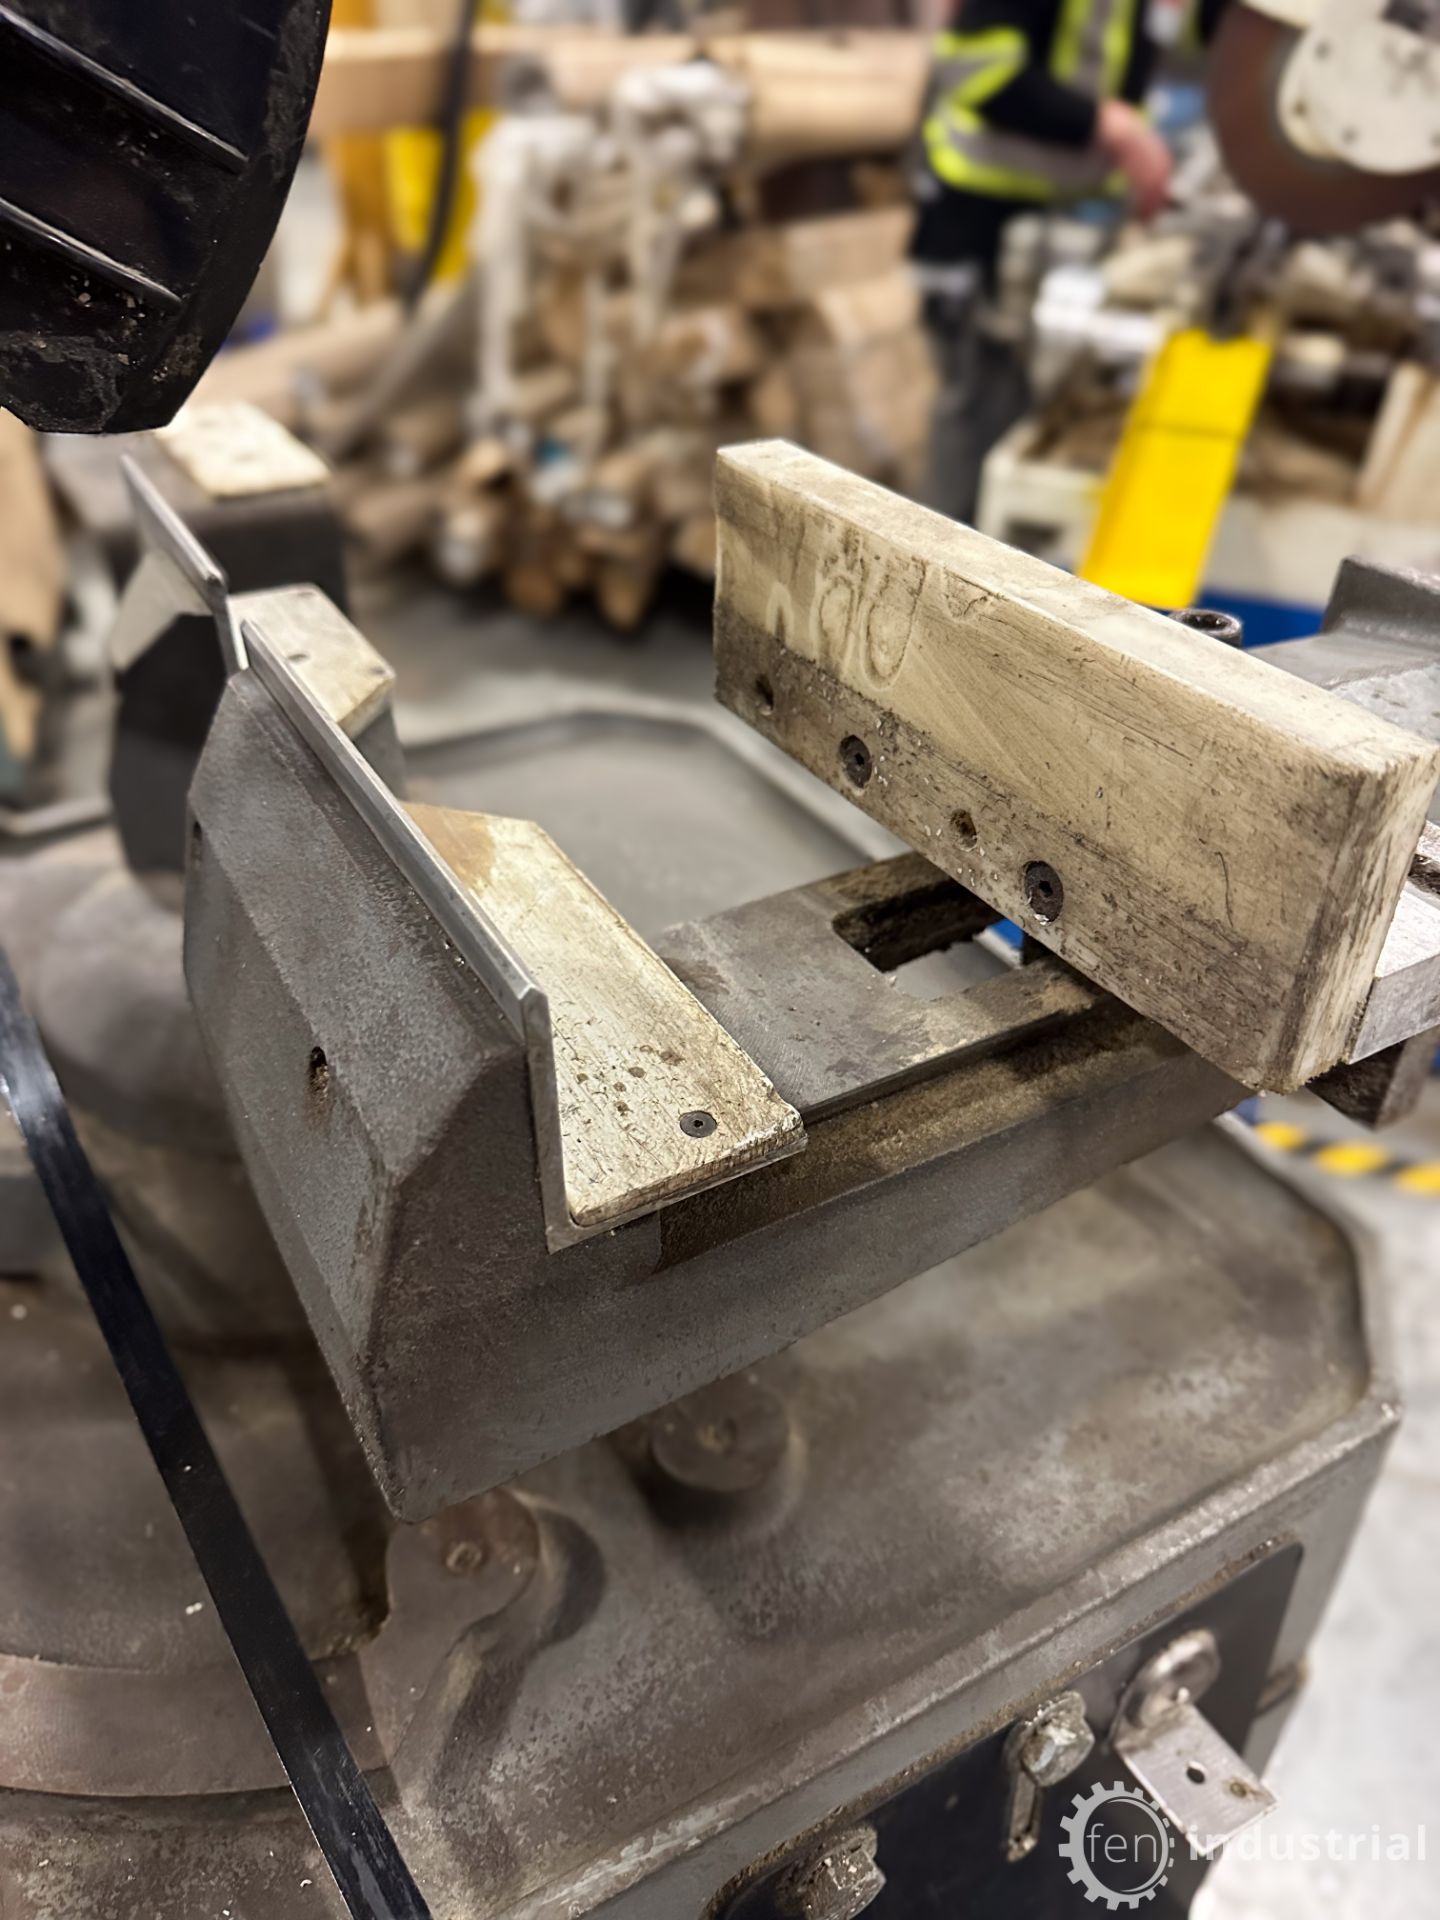 2016 STHEMMA / DAKE 315 S. CUT COLD SAW, S/N 0900744 (RIGGING FEE $100) - Image 17 of 27